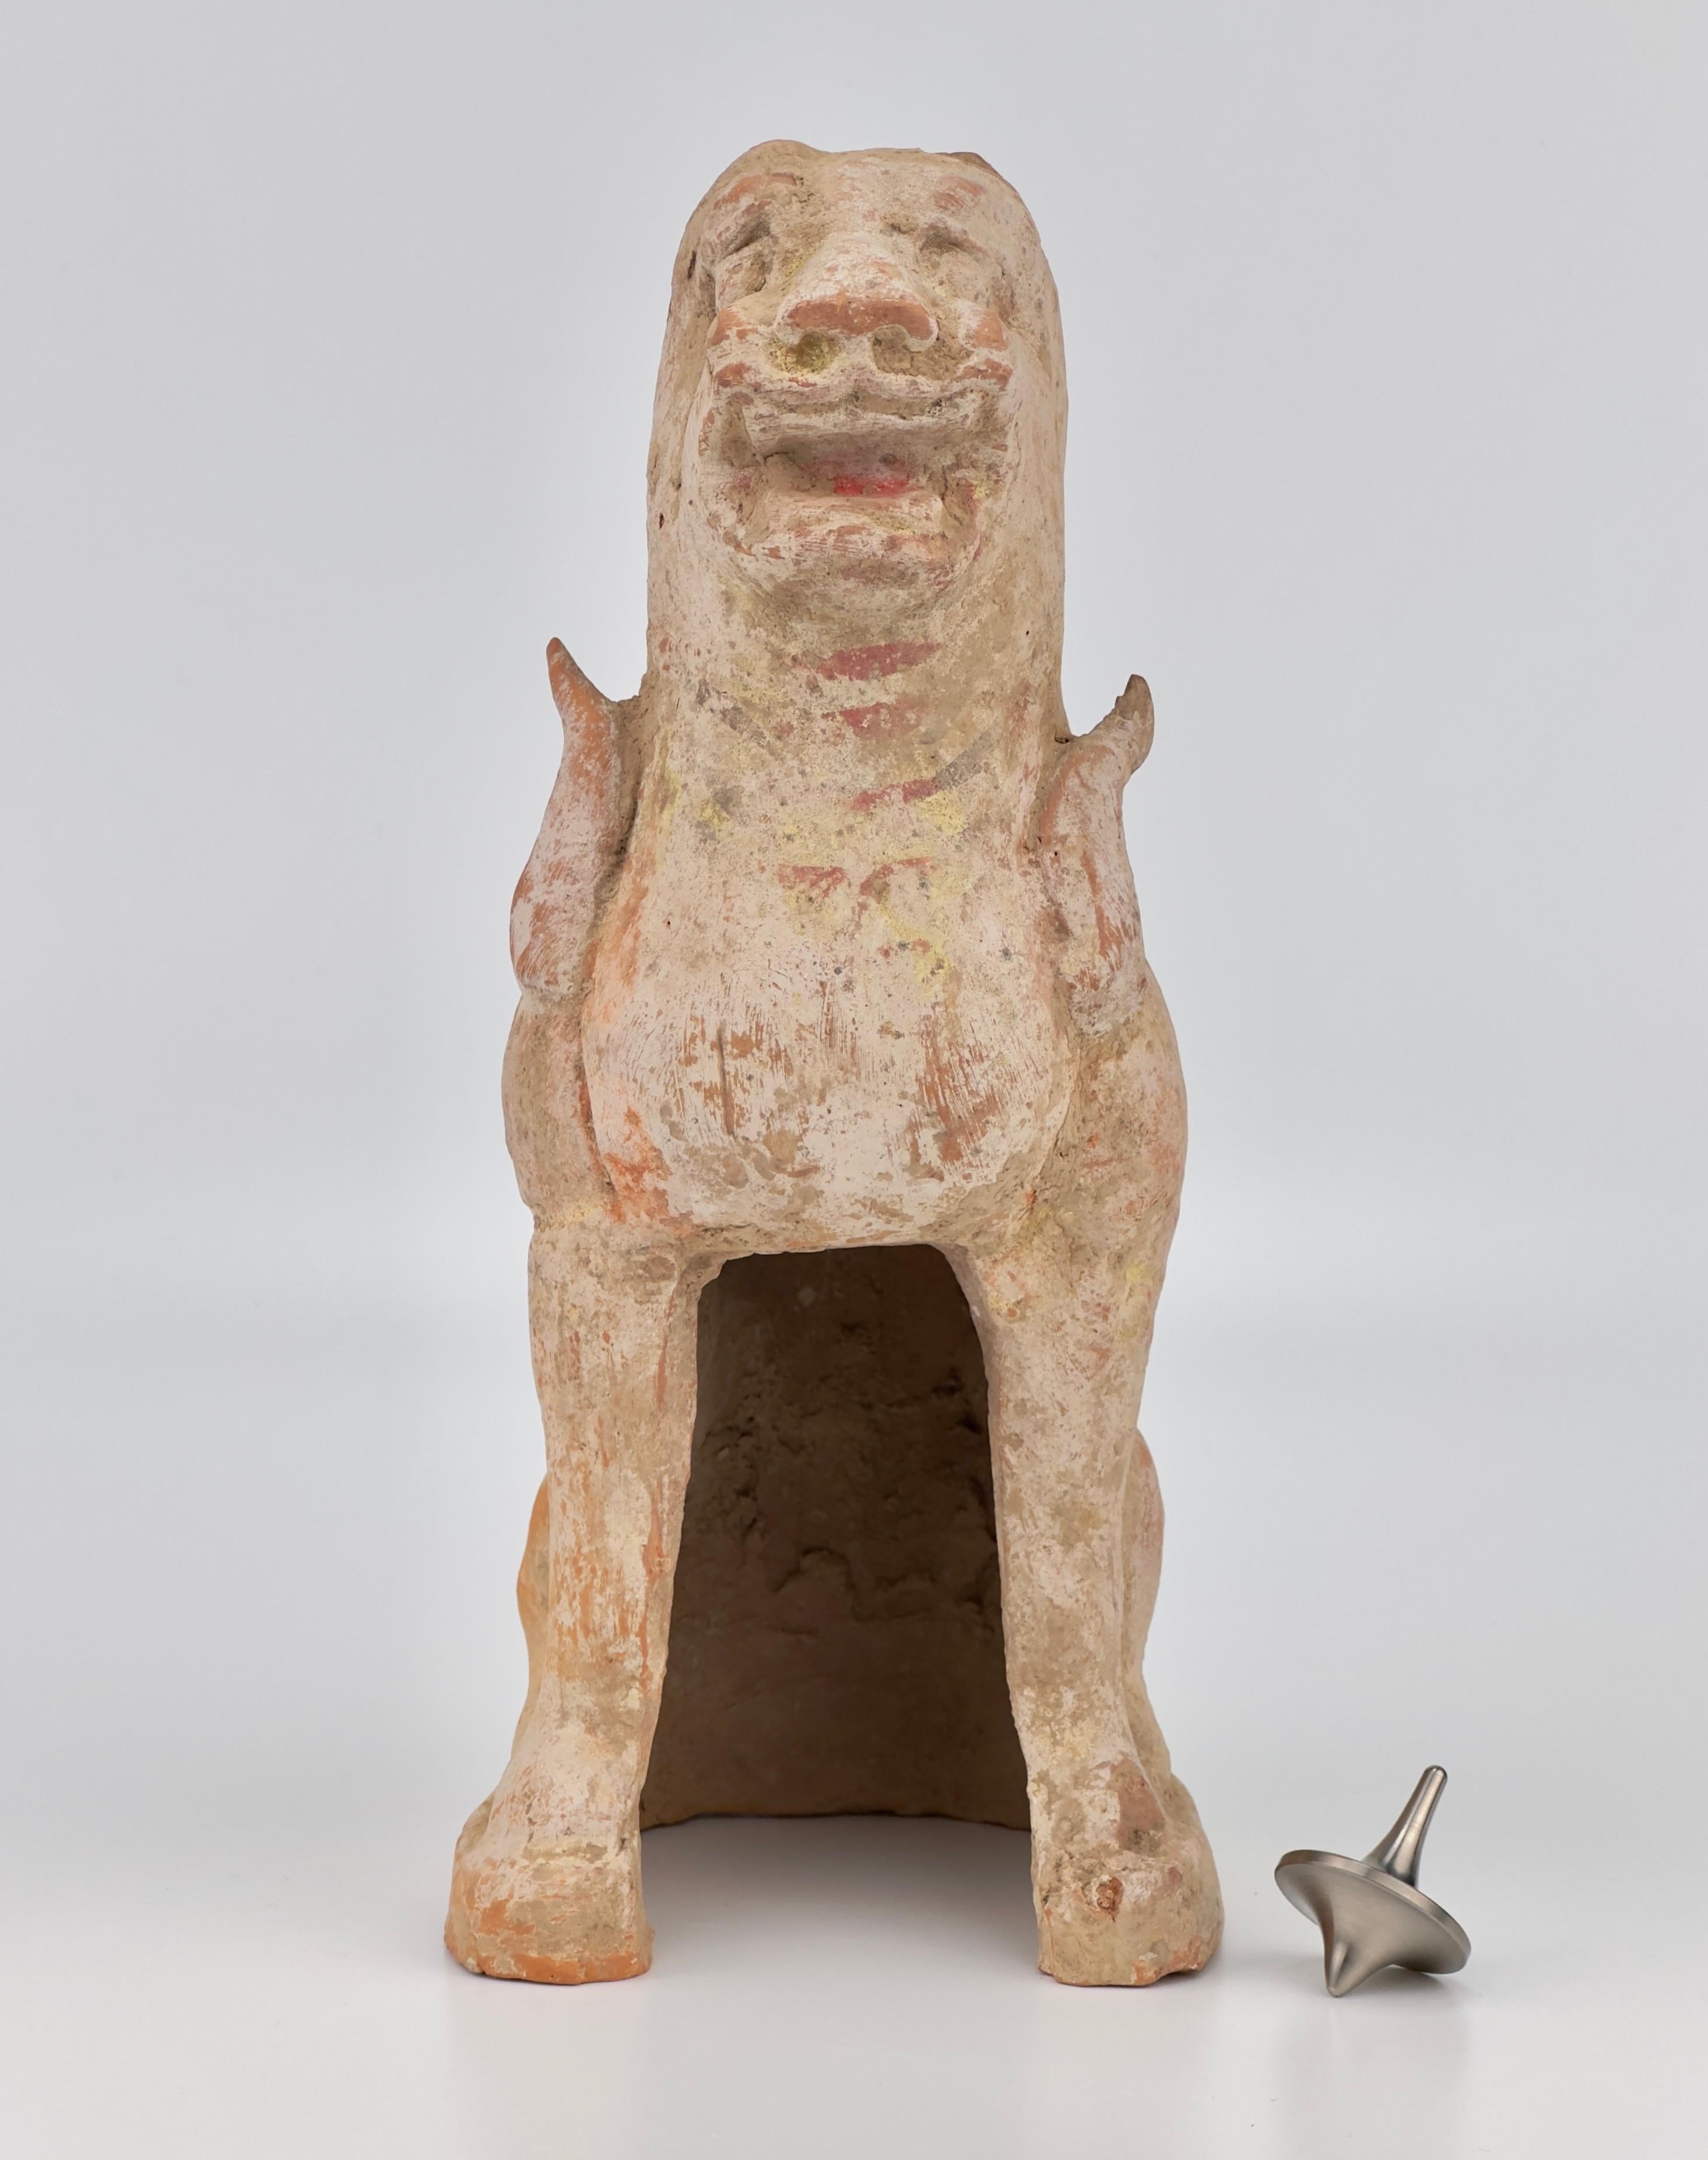 This figure represent a guardian haitai. The style of the figurine, with its facial features and remnants of paint, suggests it could be a part of funerary art, which was common in Chinese culture during these periods.

Date : Northern Wei-Tang